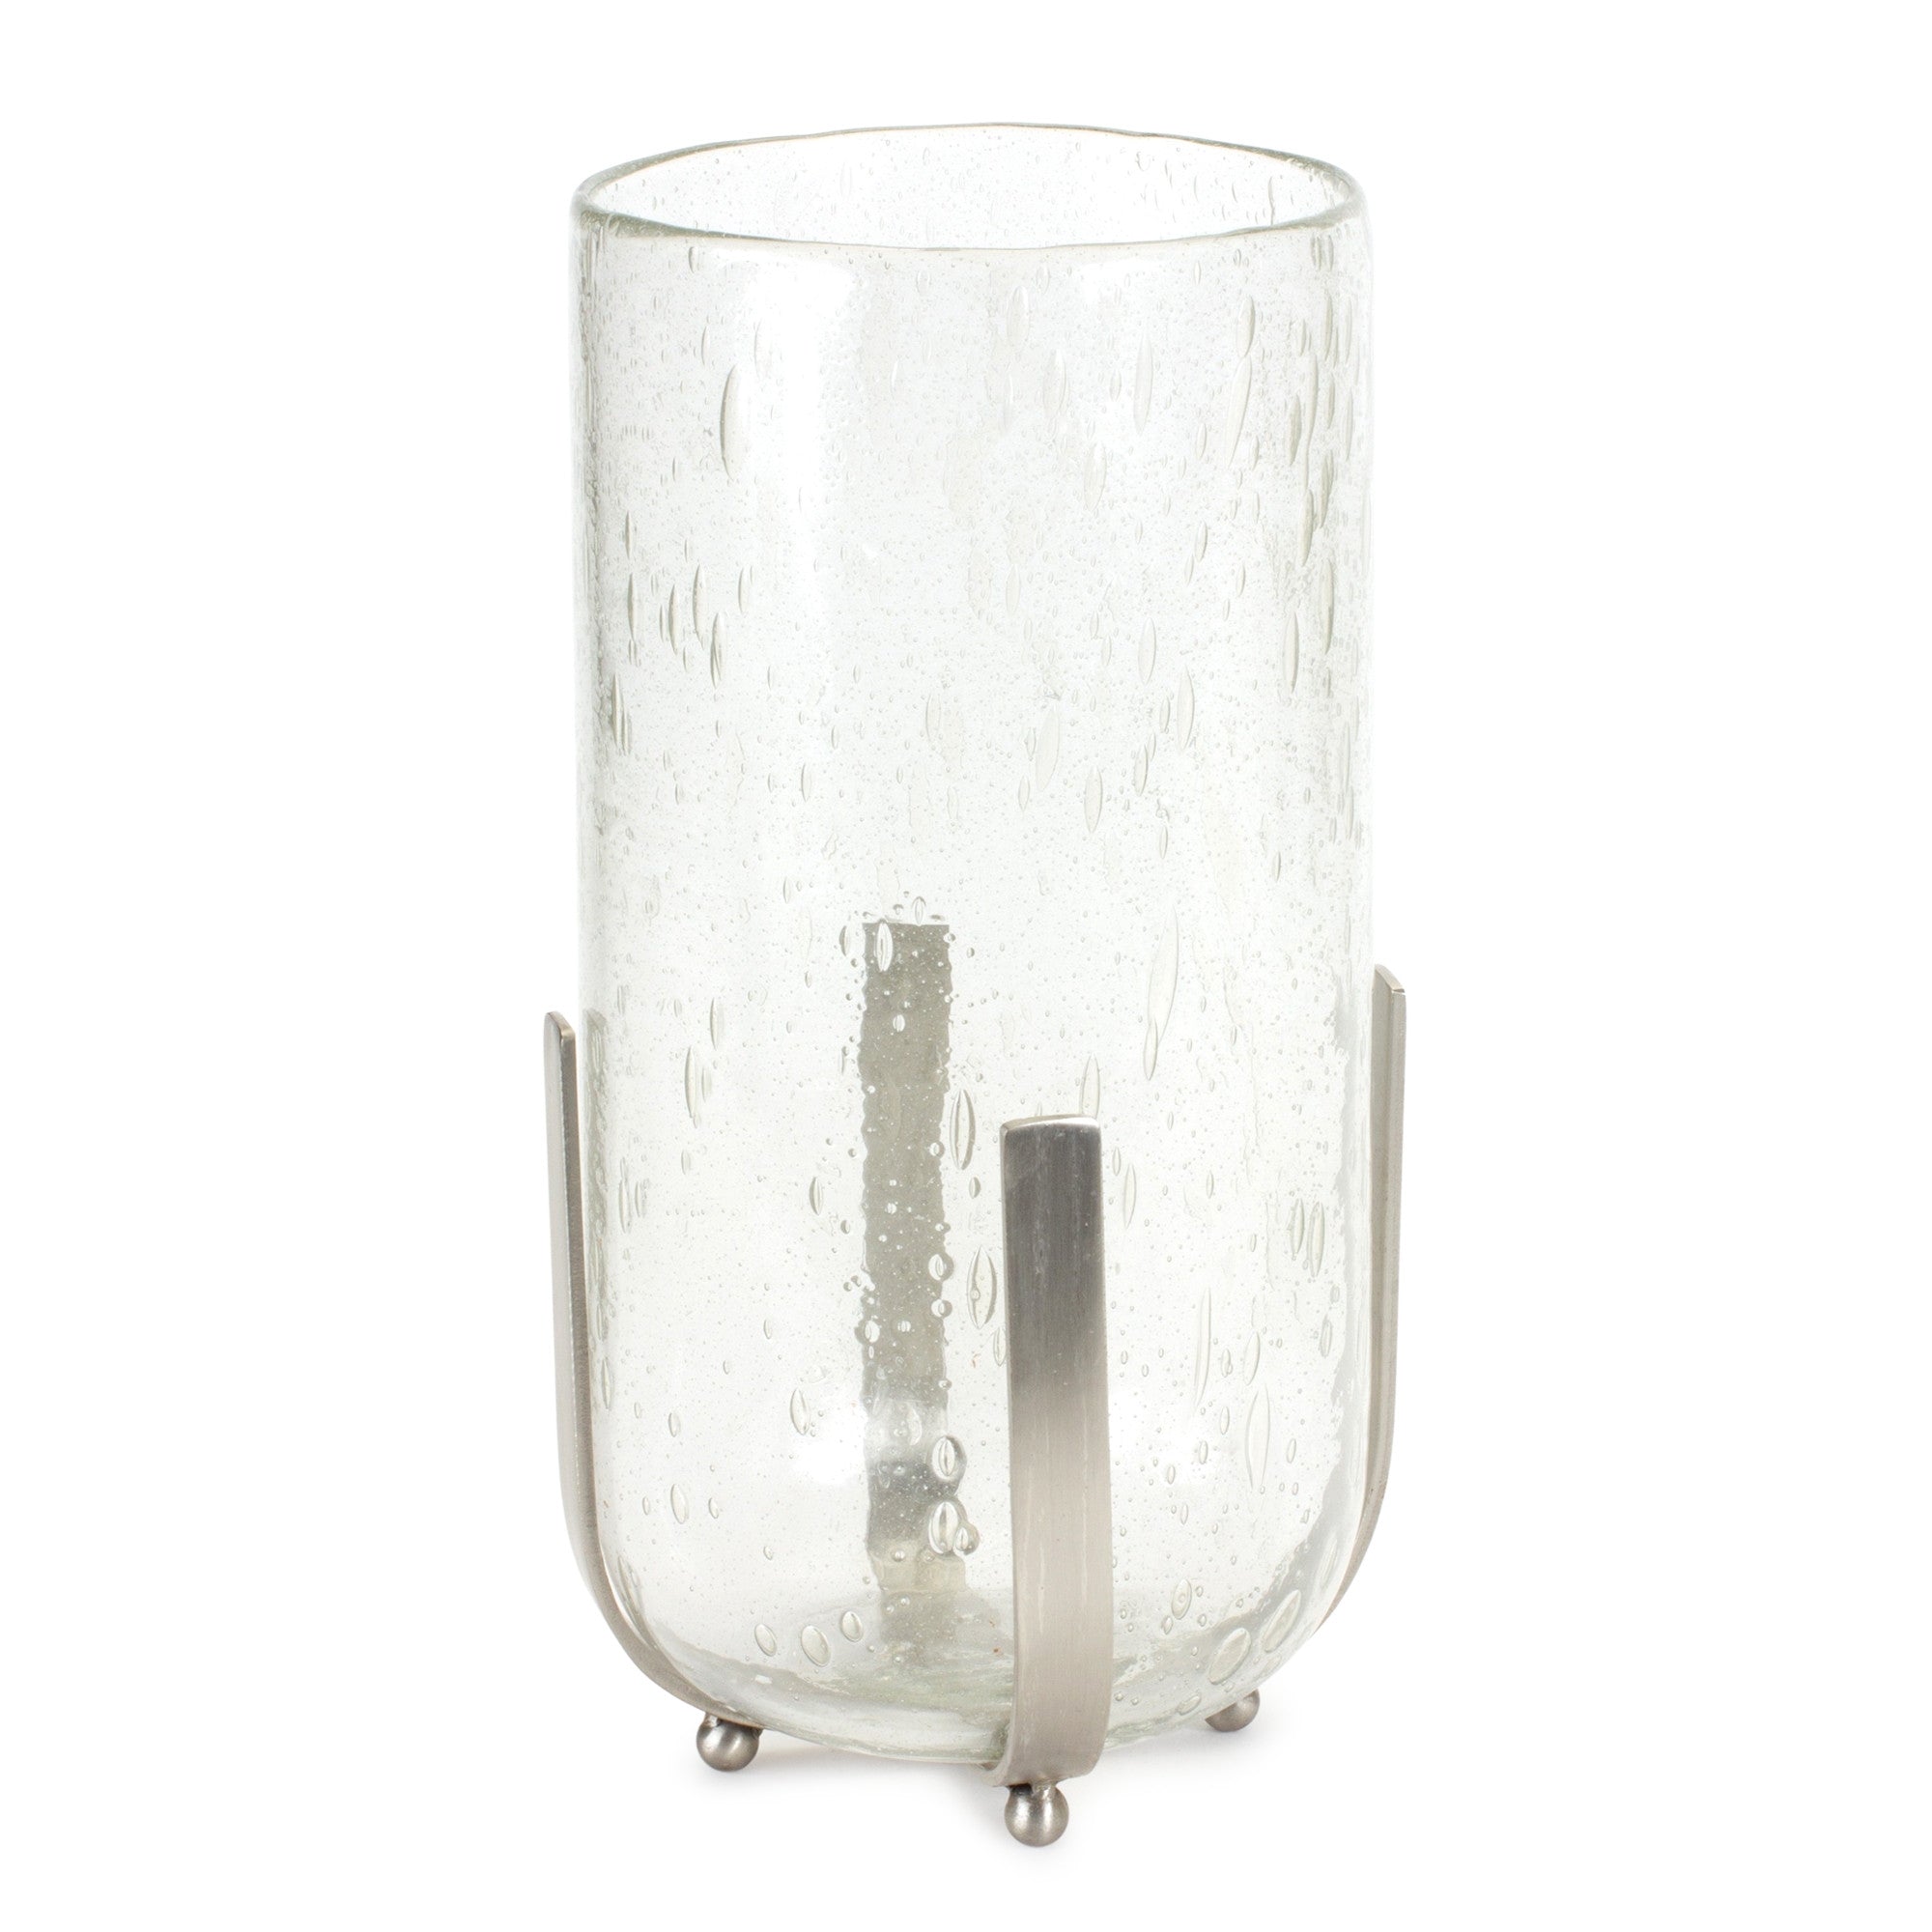 6" Silver Flameless Tabletop Hurricane Candle Holder